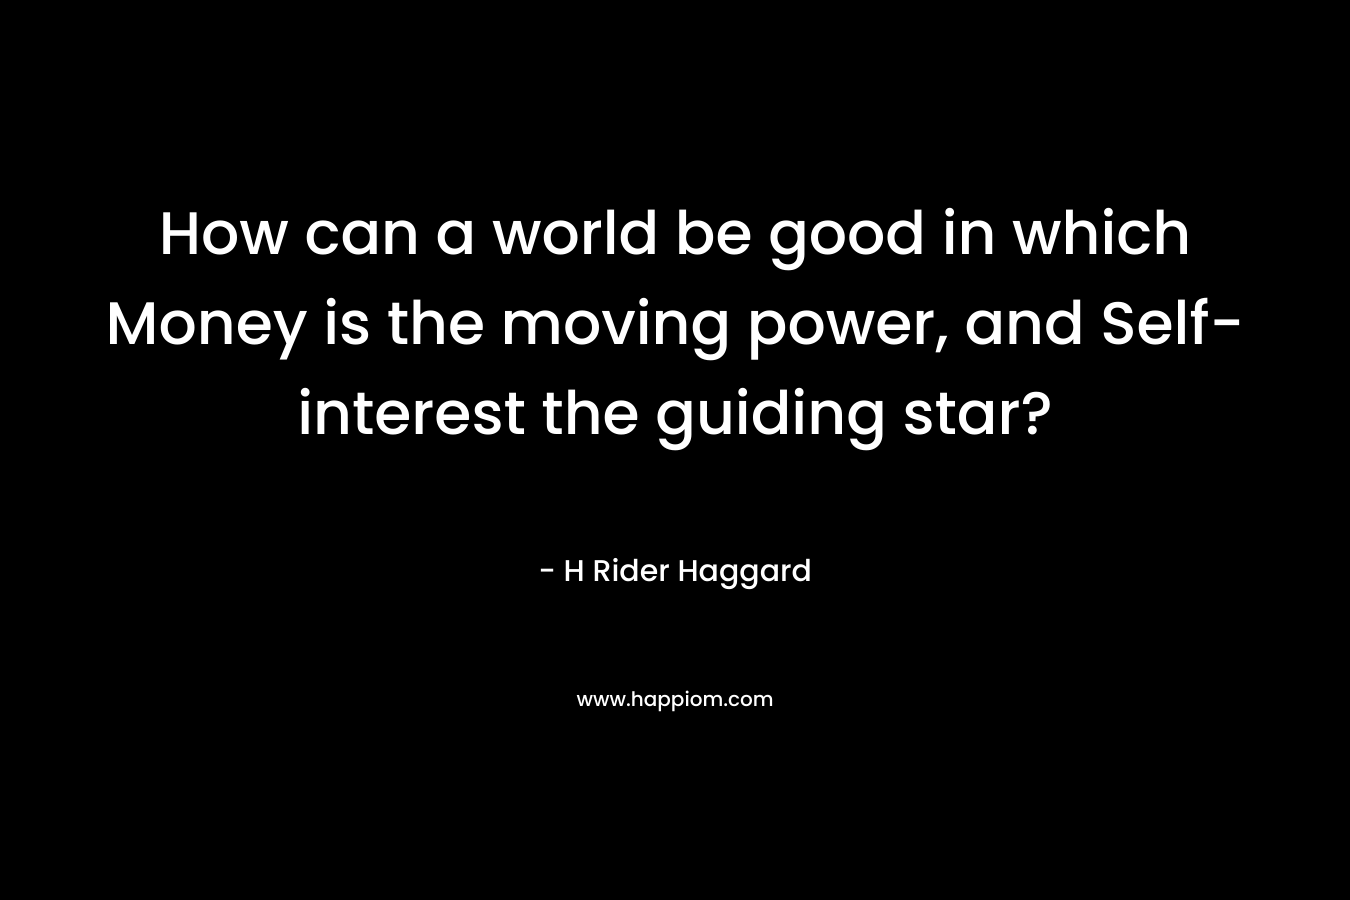 How can a world be good in which Money is the moving power, and Self-interest the guiding star?